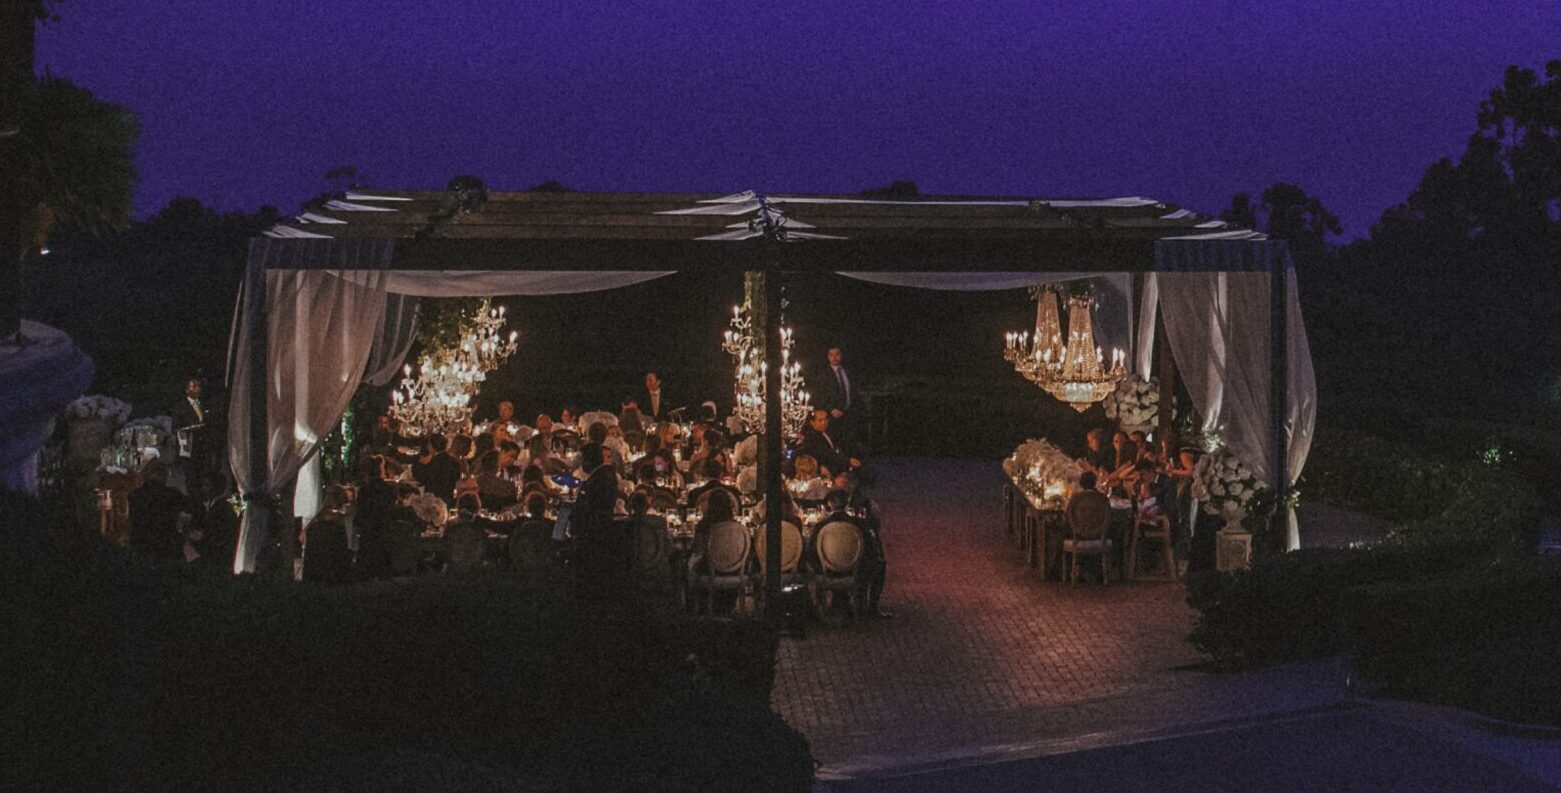 Nighttime wedding reception outdoors at Resort at Pelican Hill with an illuminated gazebo, elegantly setup tables, and a vibrant purple sky.